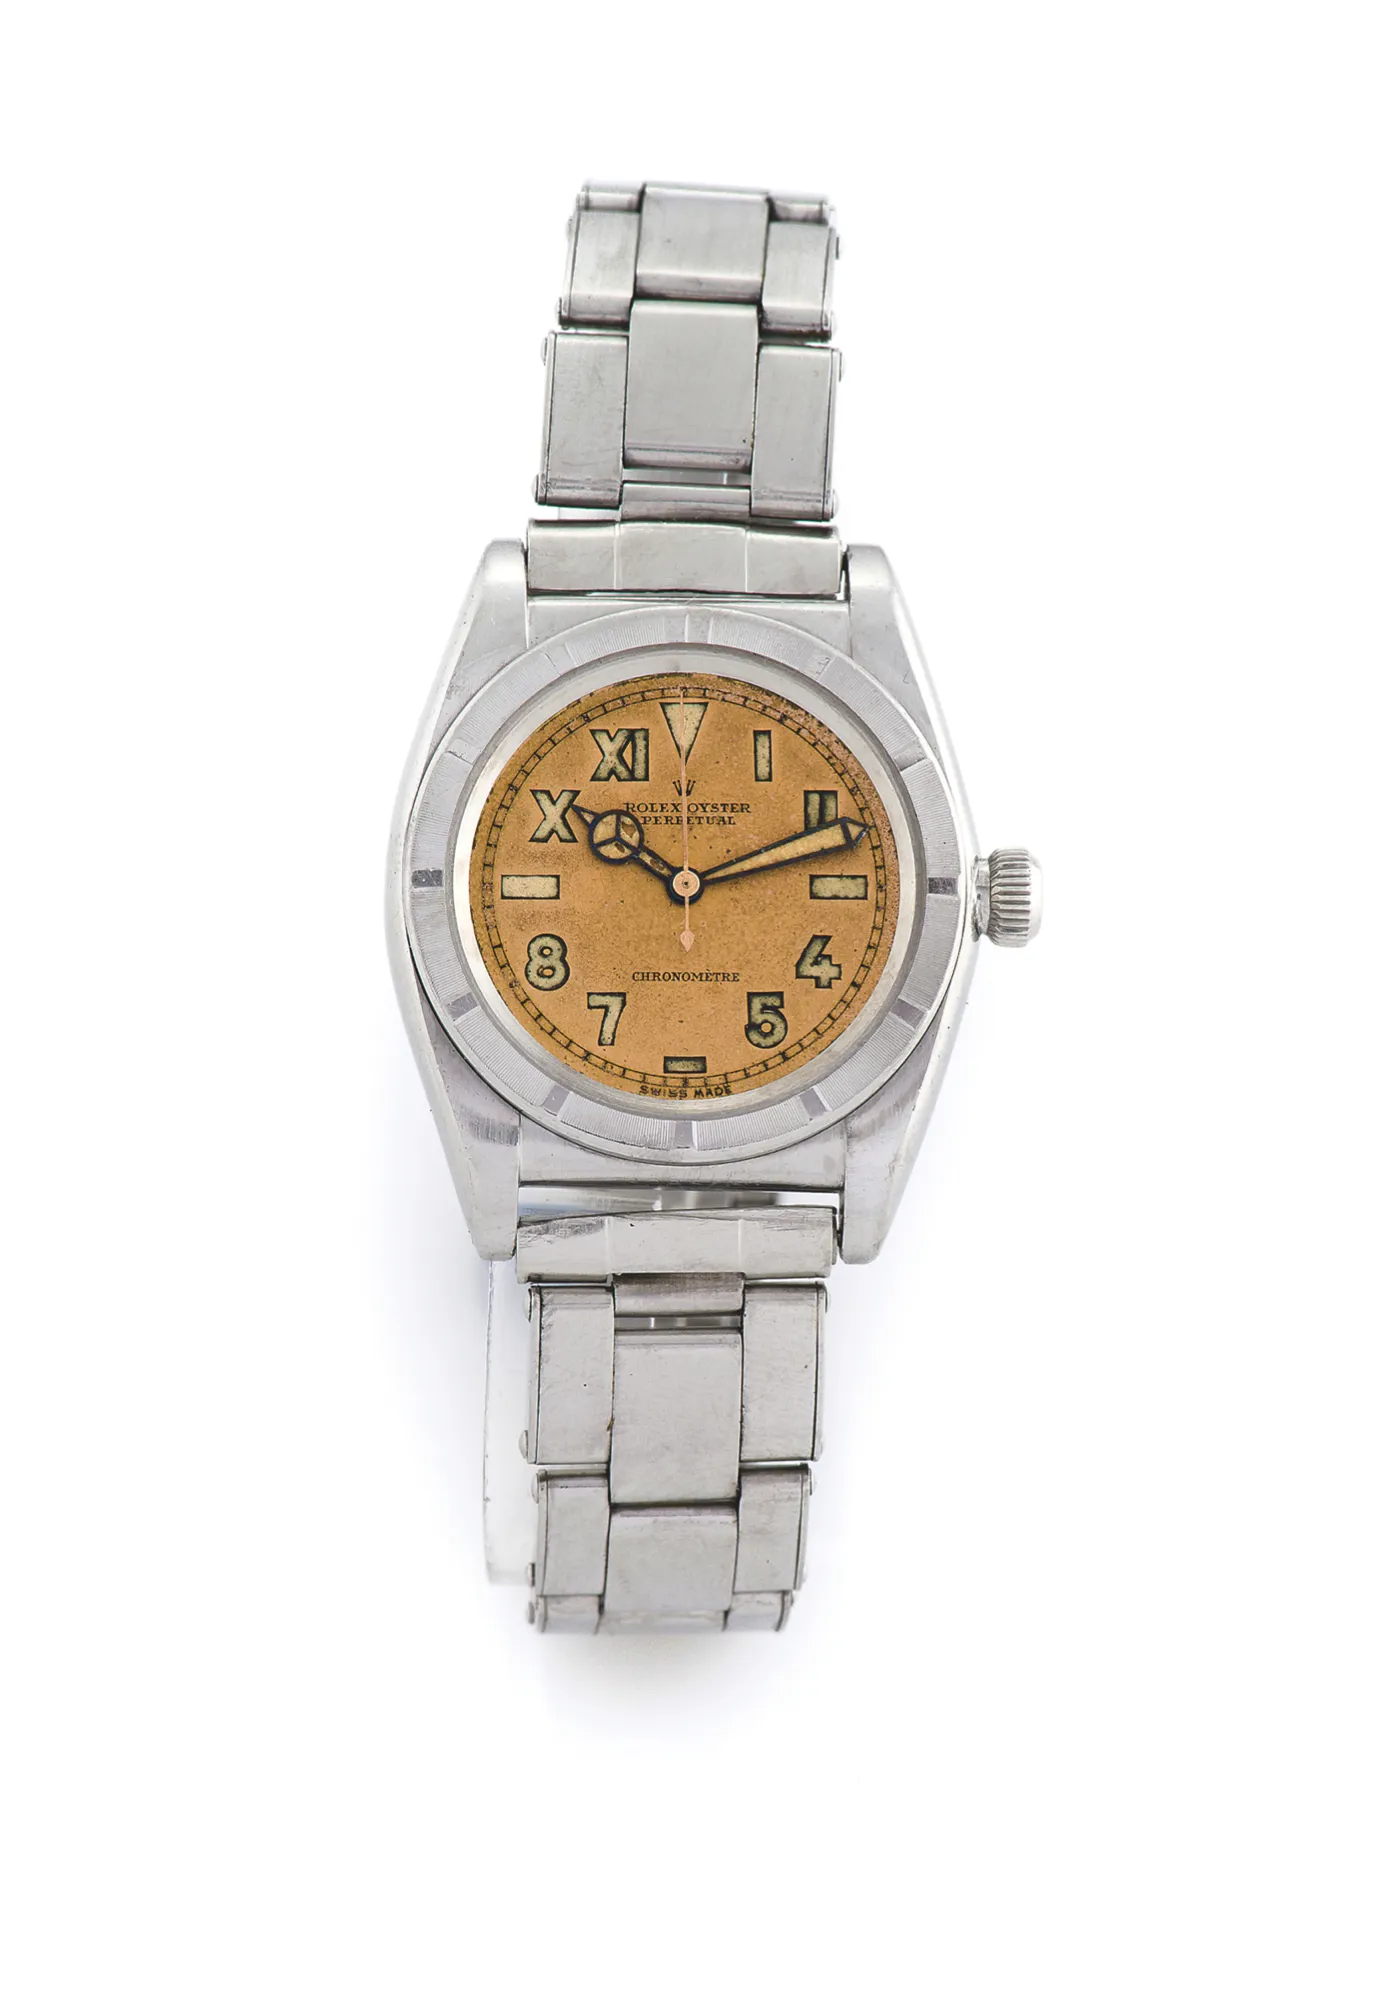 Rolex Oyster Perpetual 3372 32mm Stainless steel Gilt dial